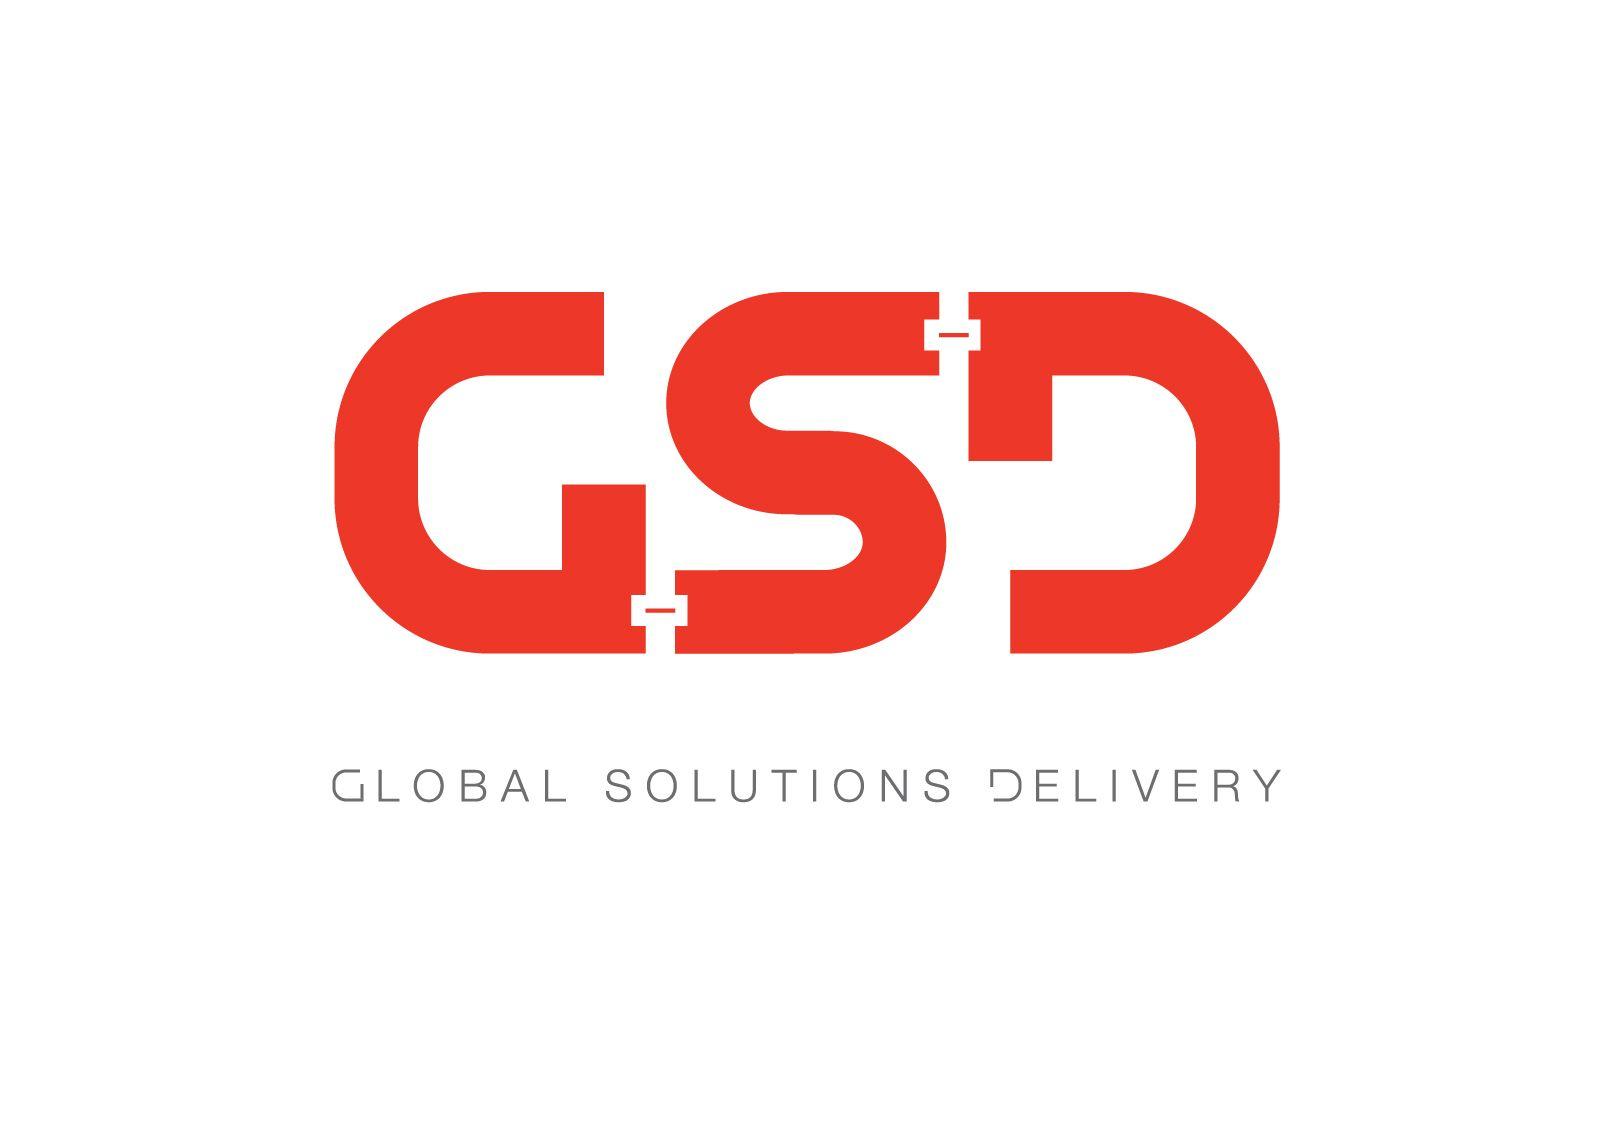 GSD Logo - GSD logo. GSD is a software development company based in Japan. G